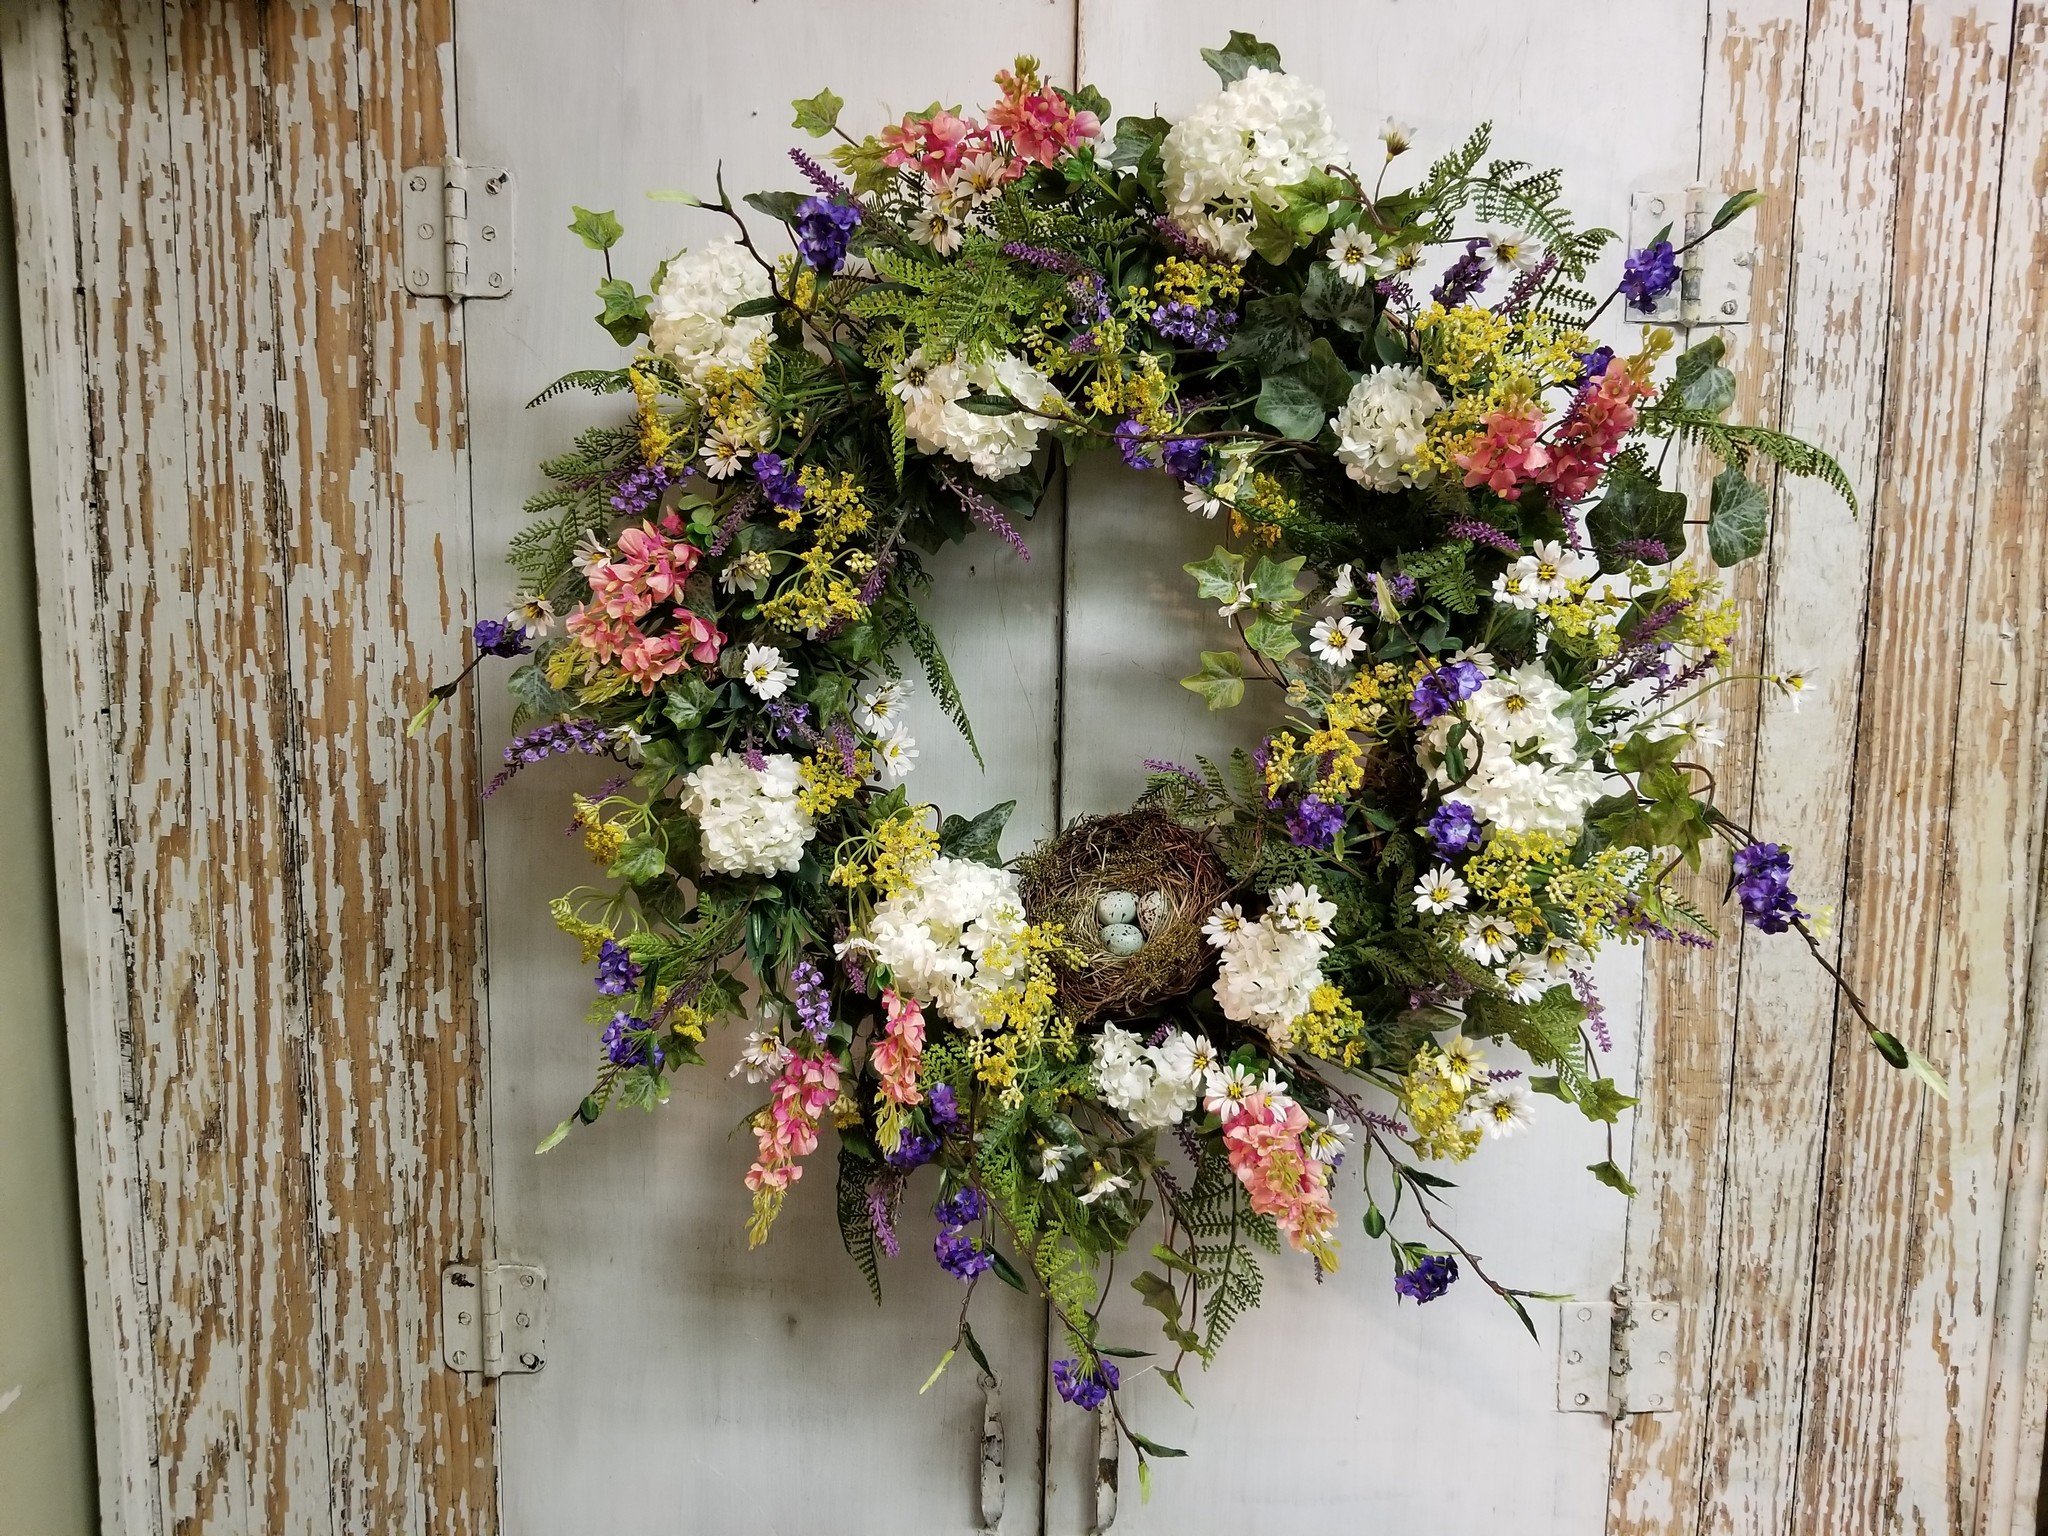 How to make a beautiful spring wreath